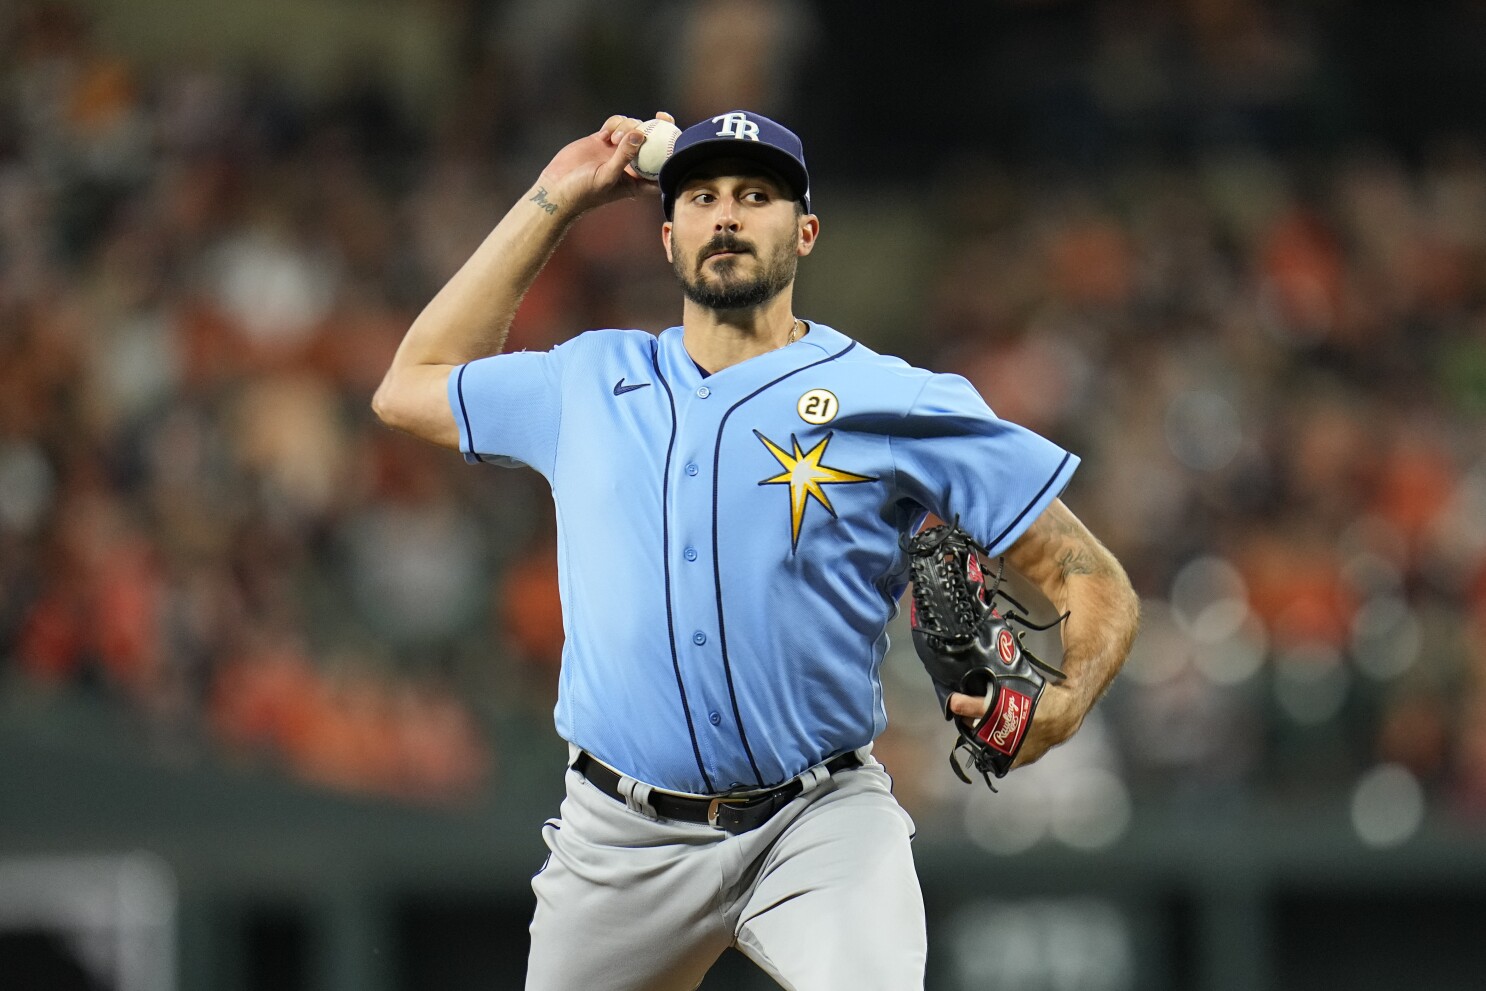 Team effort sends Rays to 2-1 win over Royals